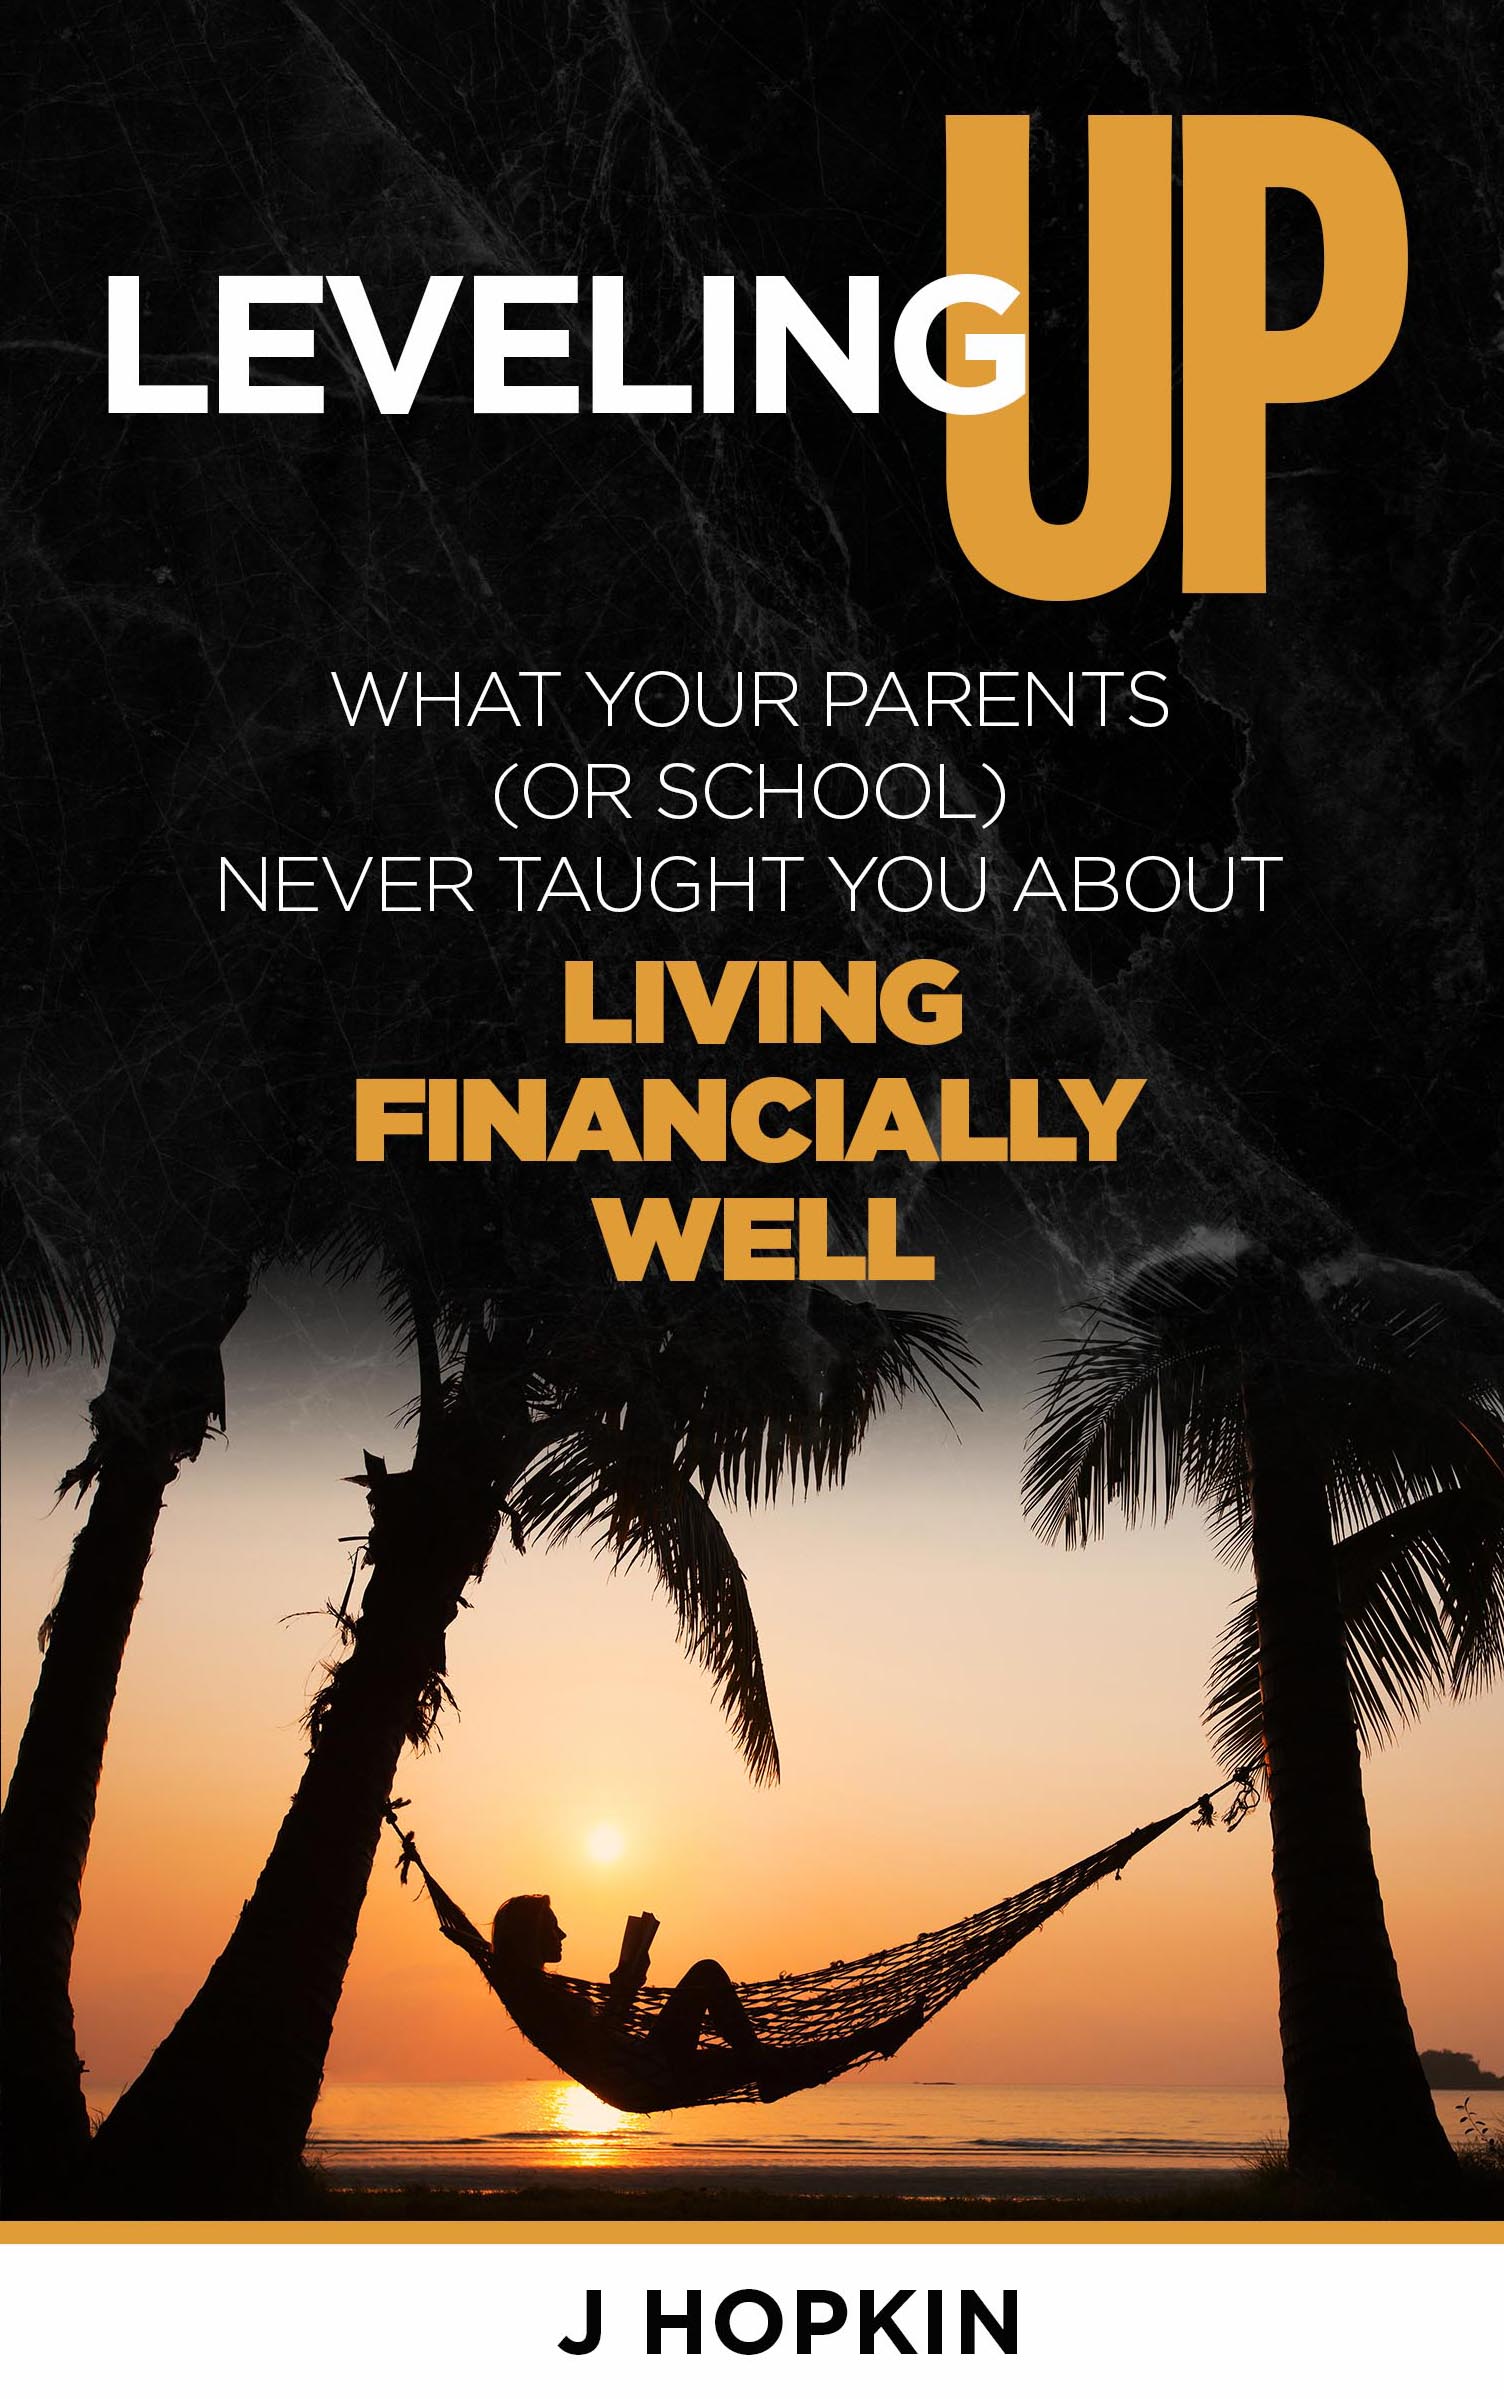 FREE: Leveling Up – what your parents (or school) never taught you about living financially well by J Hopkin